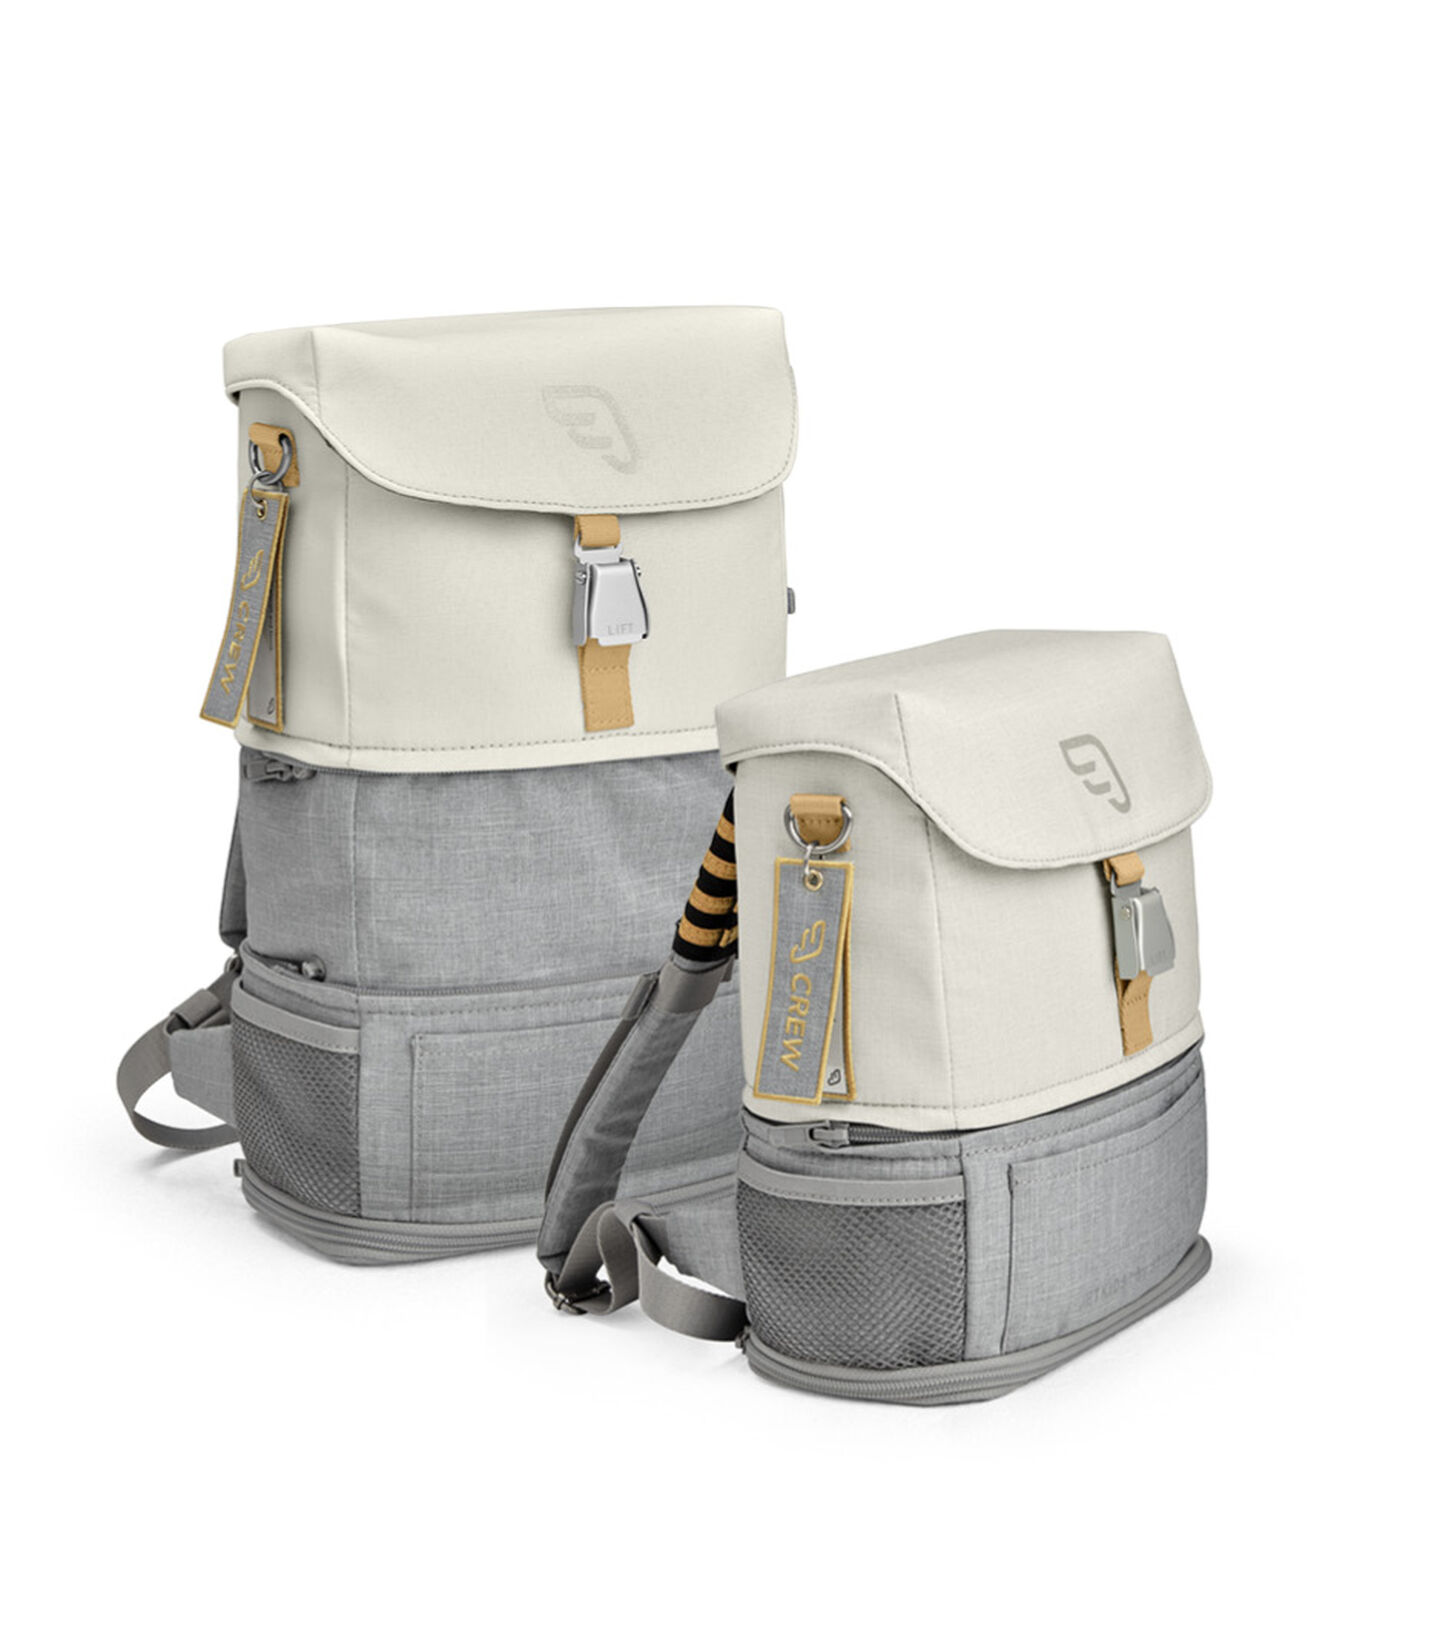 JetKids by Stokke® Crew Backpack White, Biały, mainview view 5